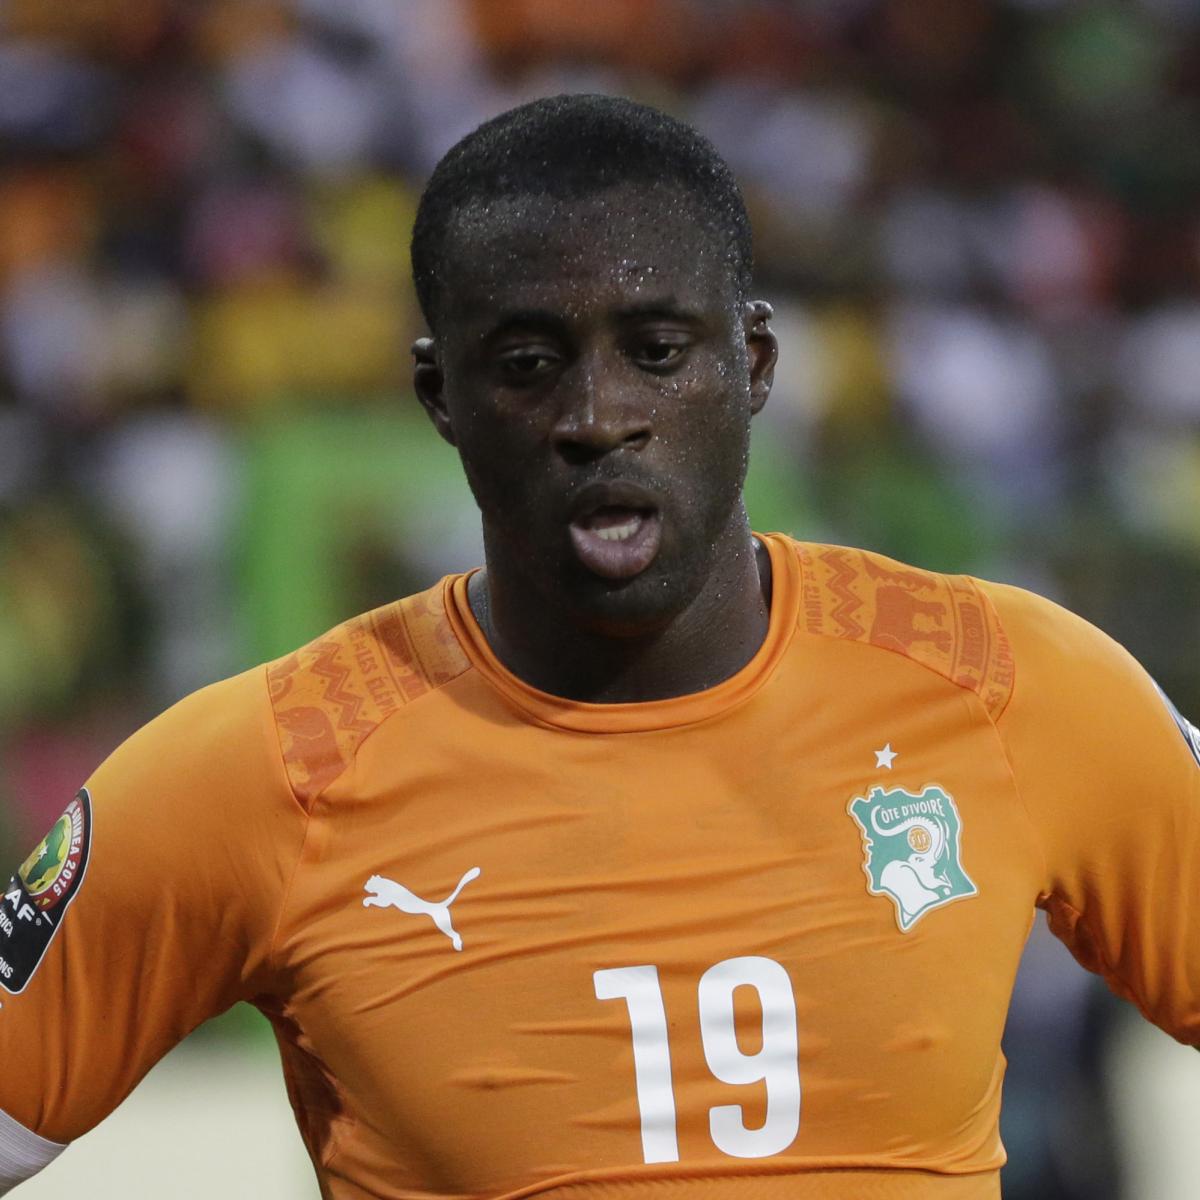 Yaya Toure gives signed shirt to five-year-old struck by ball - BBC Sport